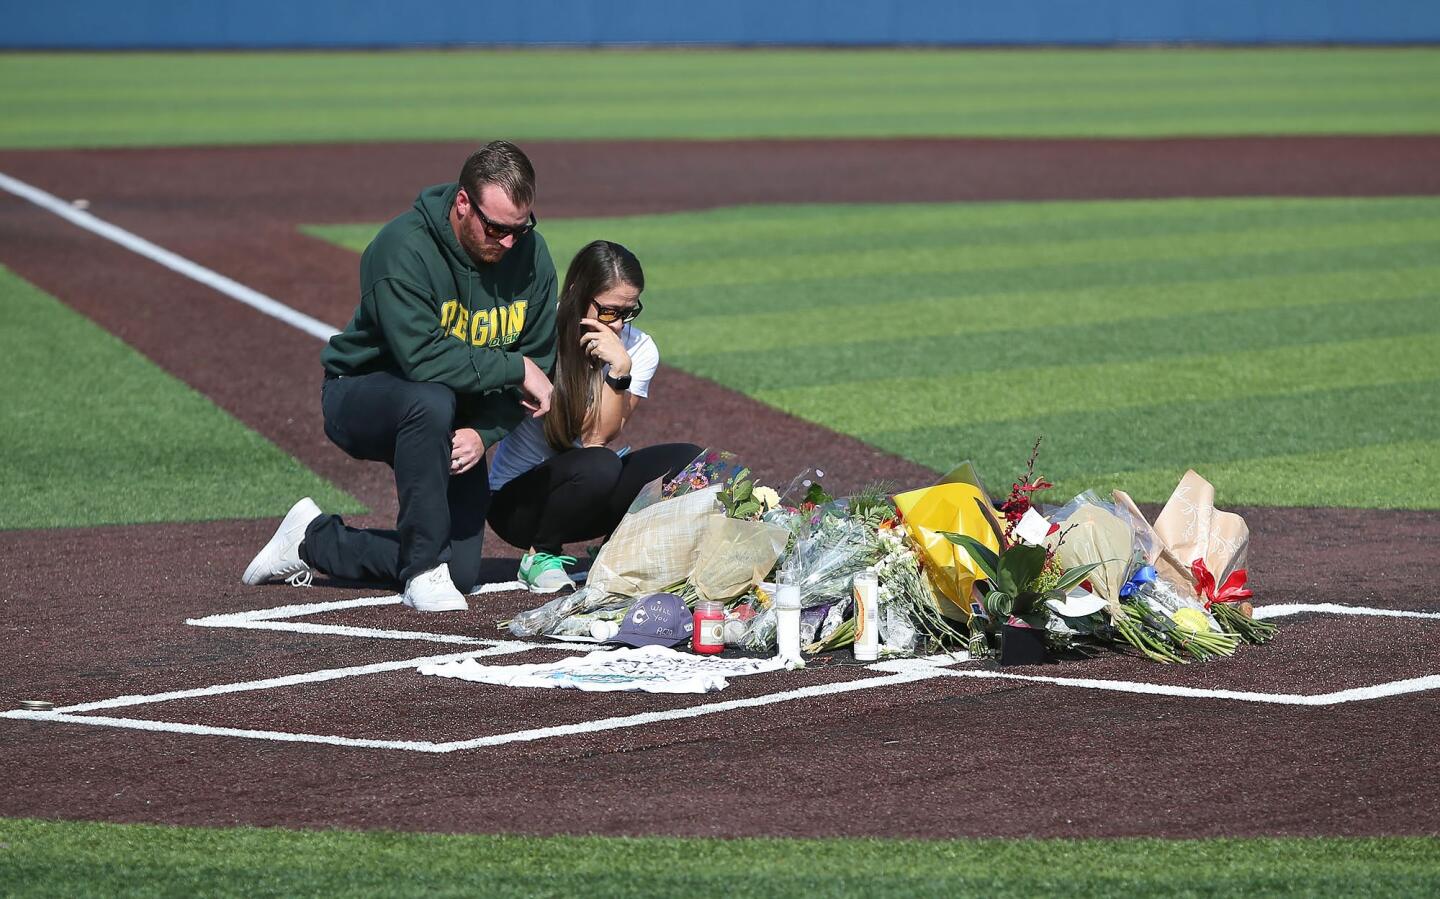 A couple pay their respects at a memorial at home plate in honor of Orange Coast College head baseball coach John Altobelli, who perished with wife Keri, and daughter, Alyssa, in Sunday's helicopter crash with Kobe Bryant.